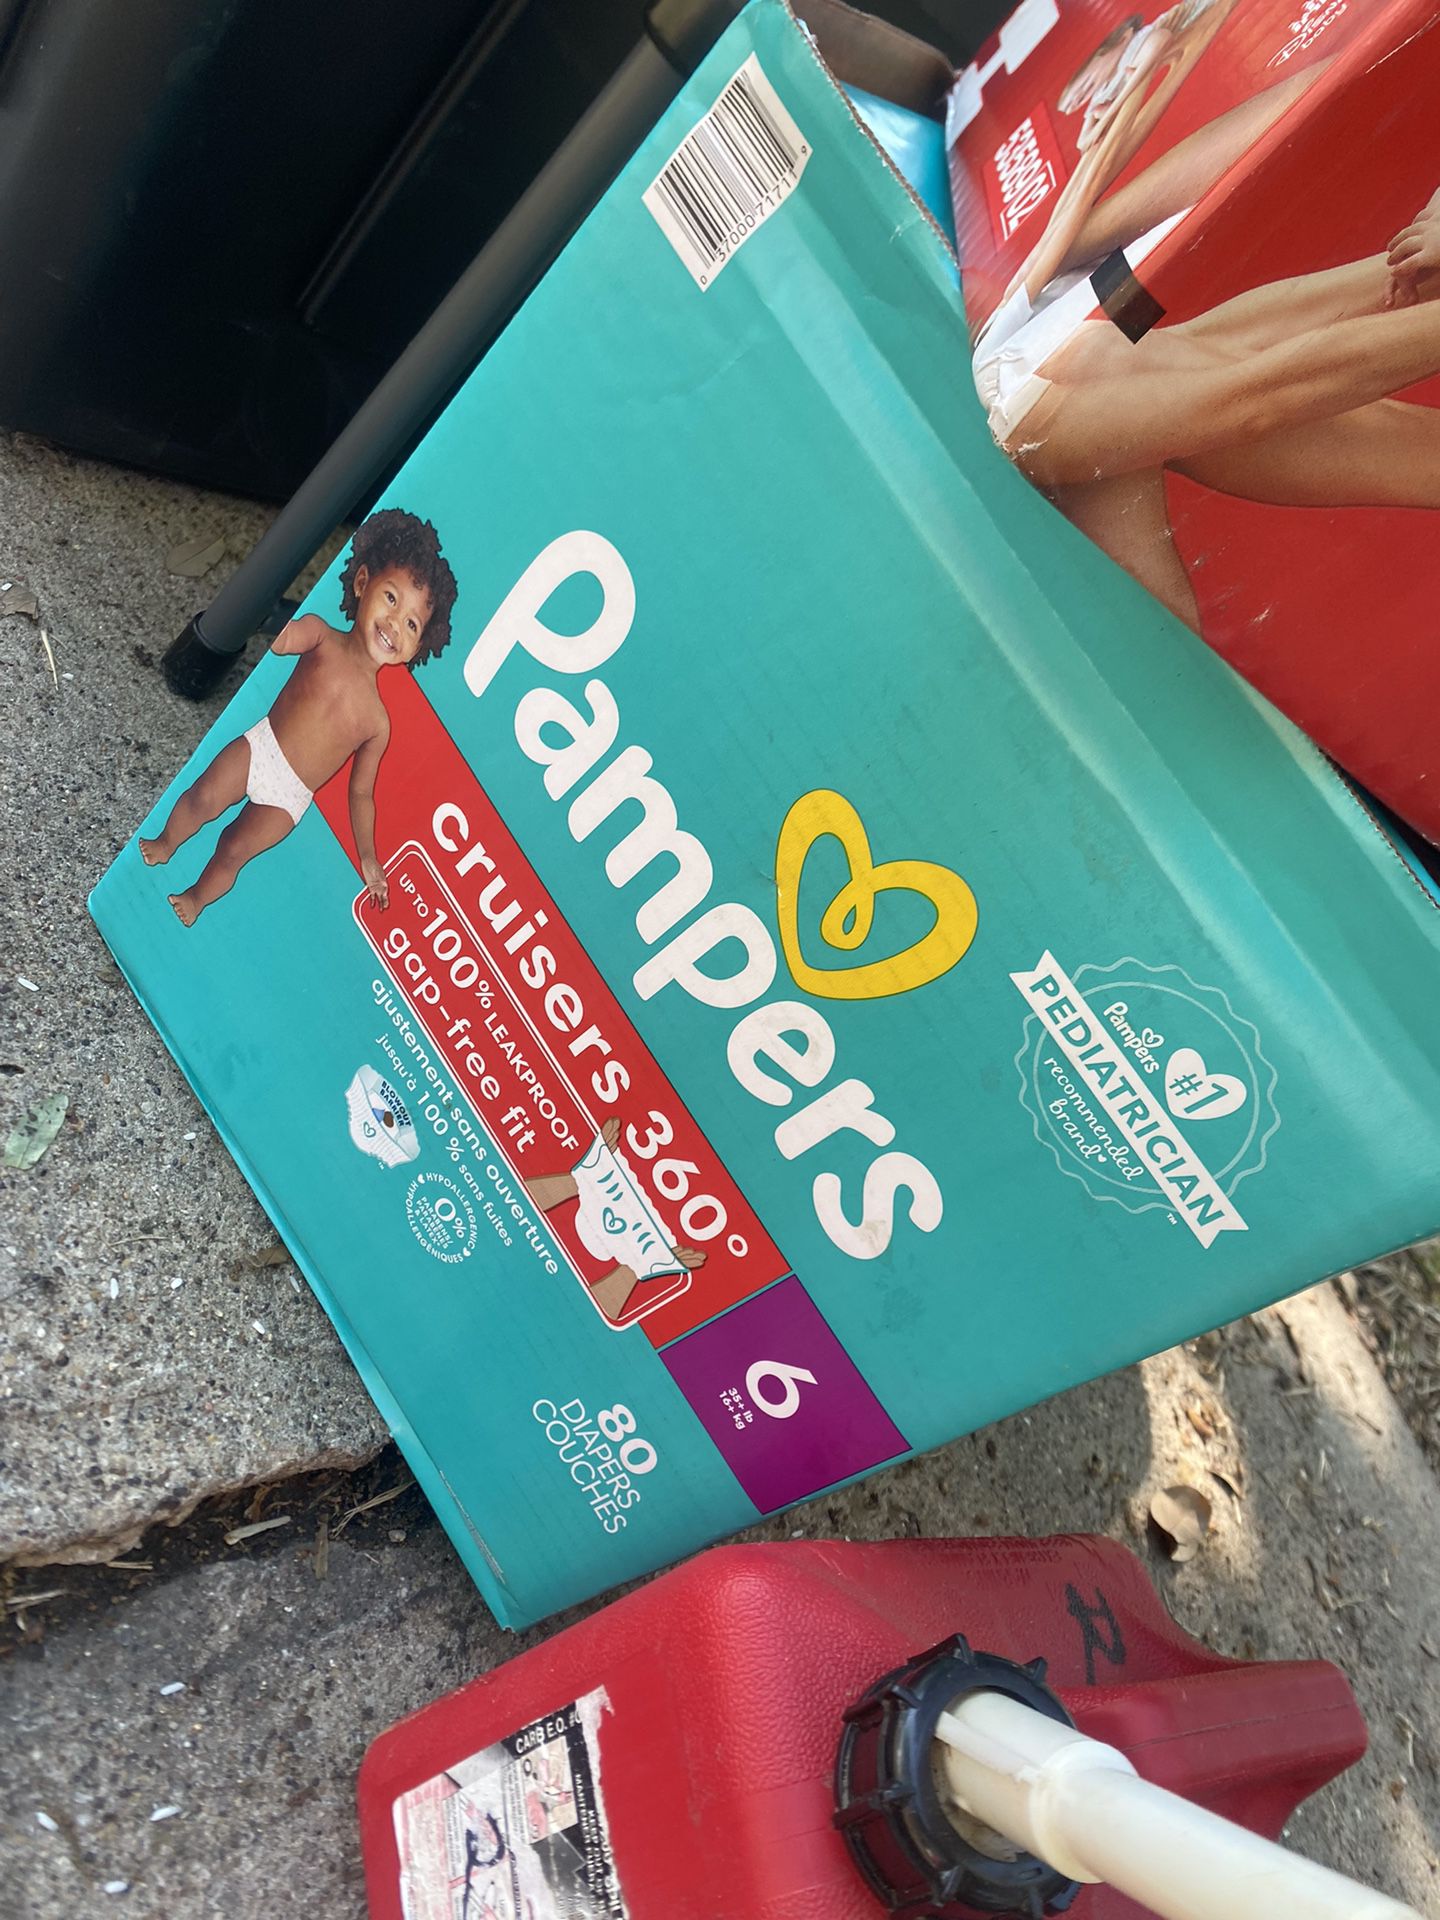 pampers 